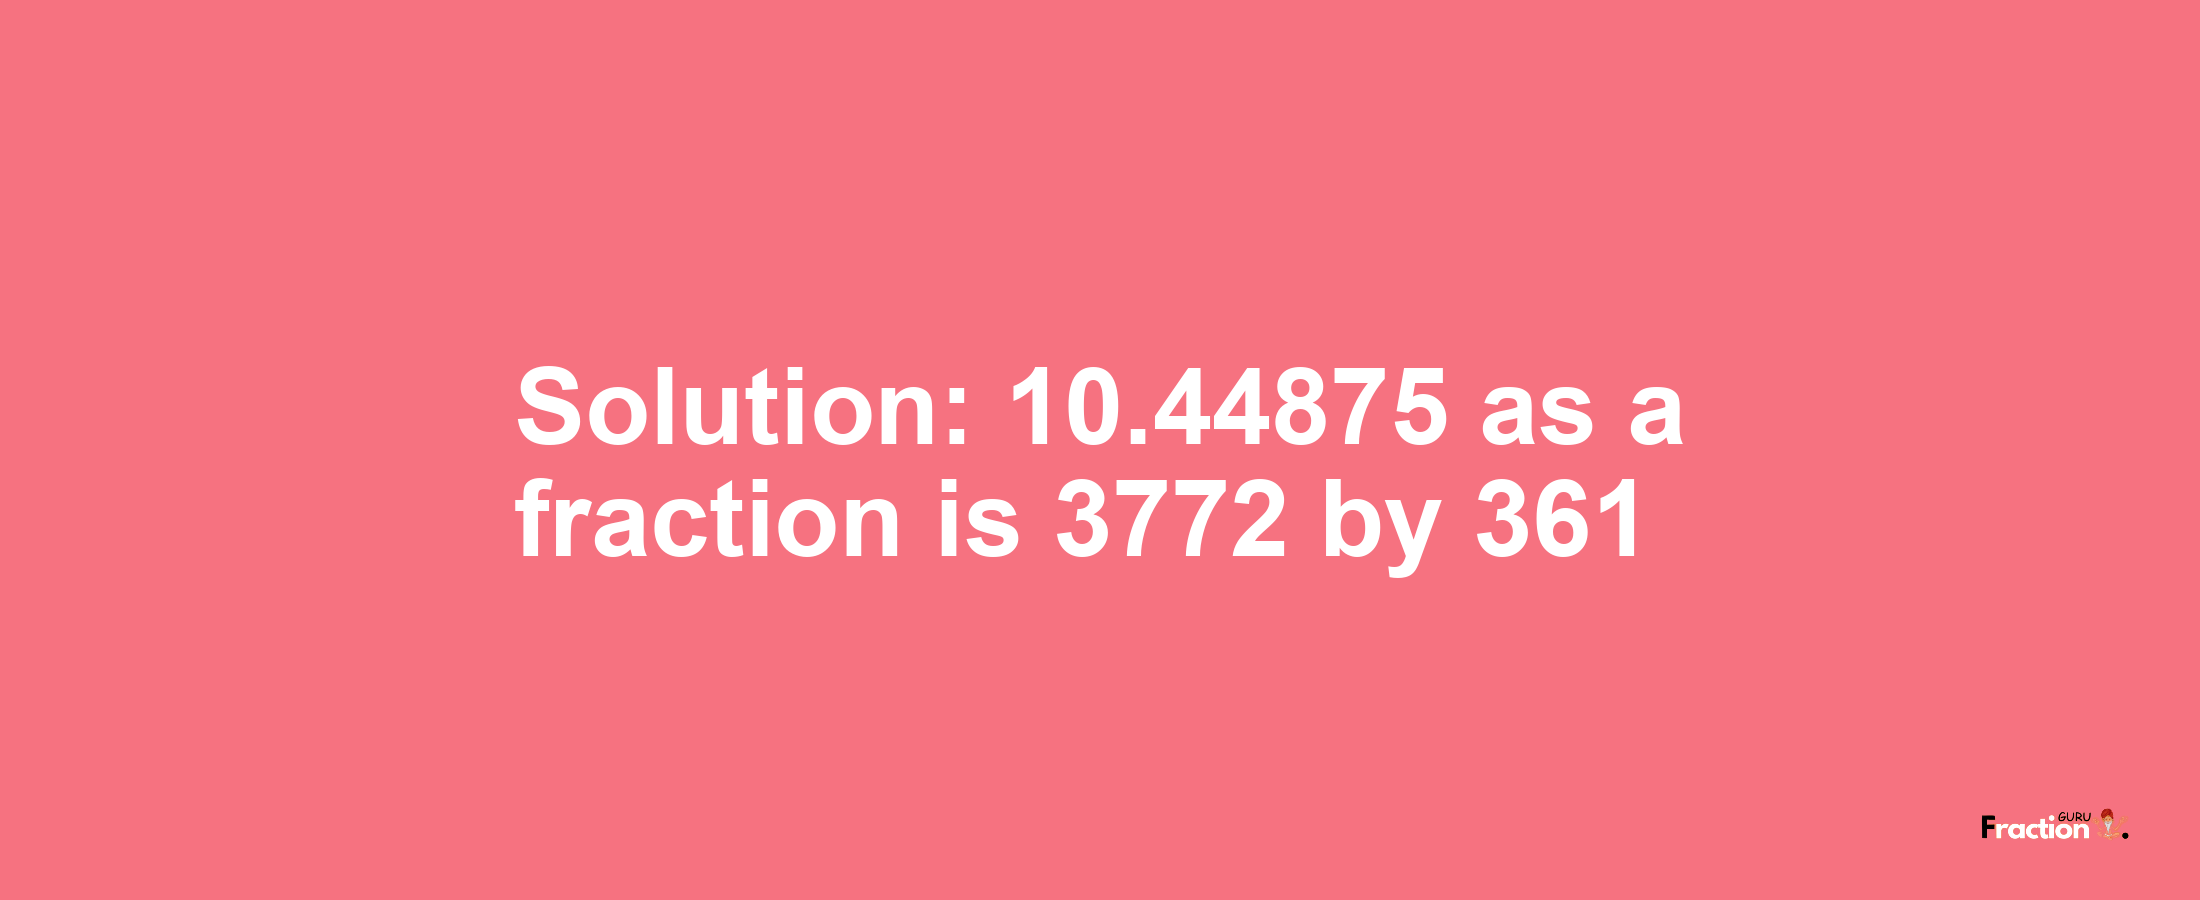 Solution:10.44875 as a fraction is 3772/361